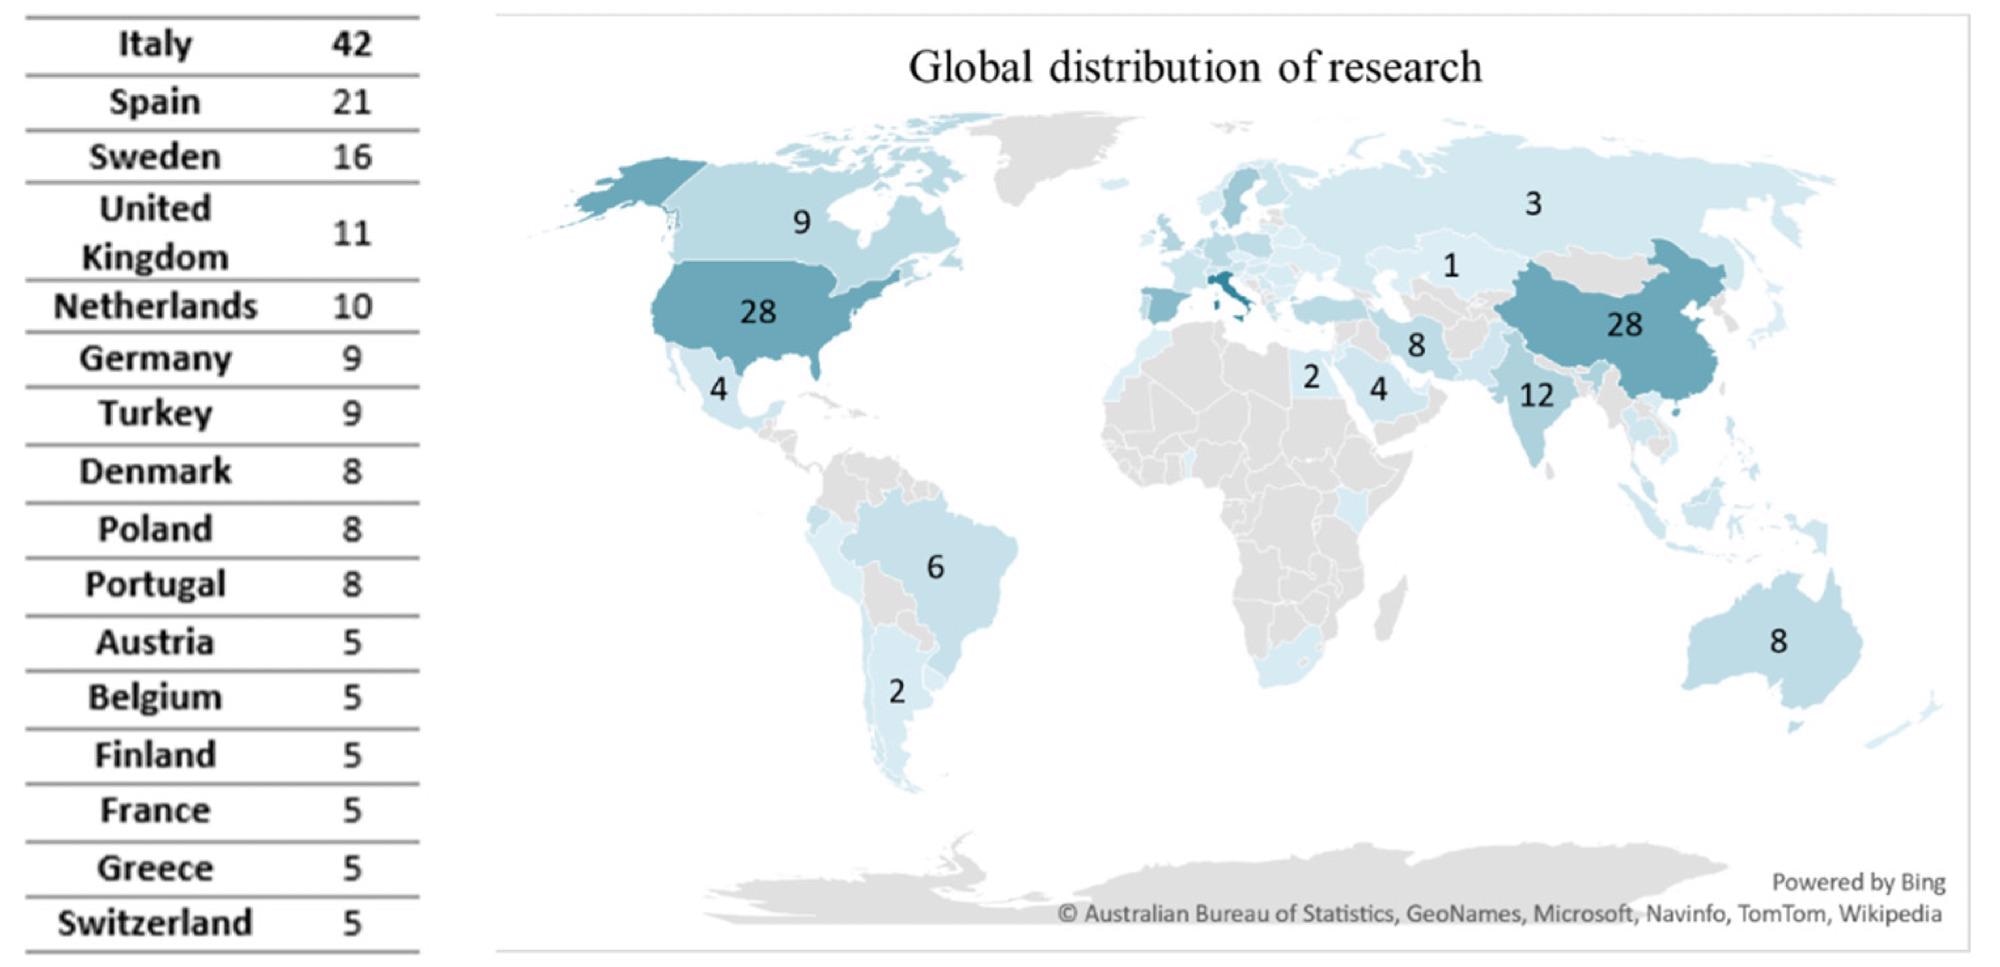 The Distribution of Research Weighs Heavily on Developed Countries.